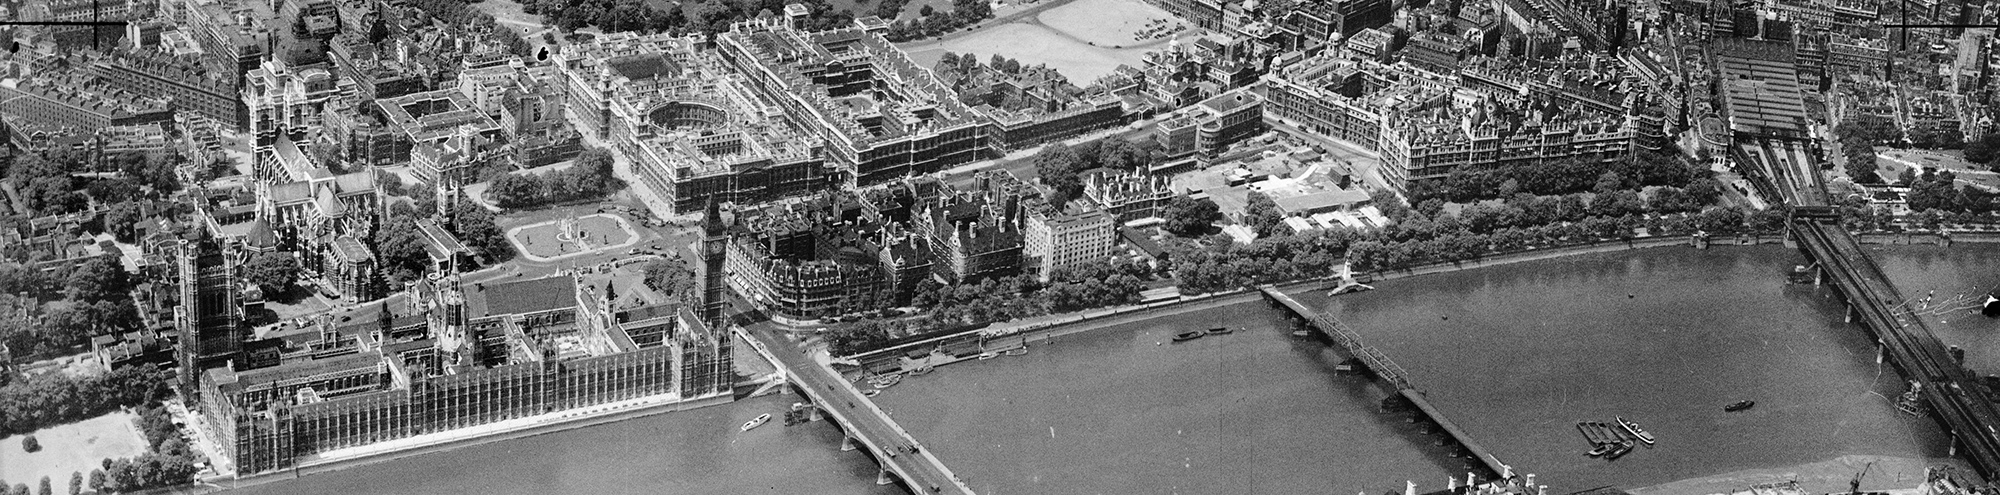 Black and white aerial photo of the Houses of Parliament and River Thames in London.